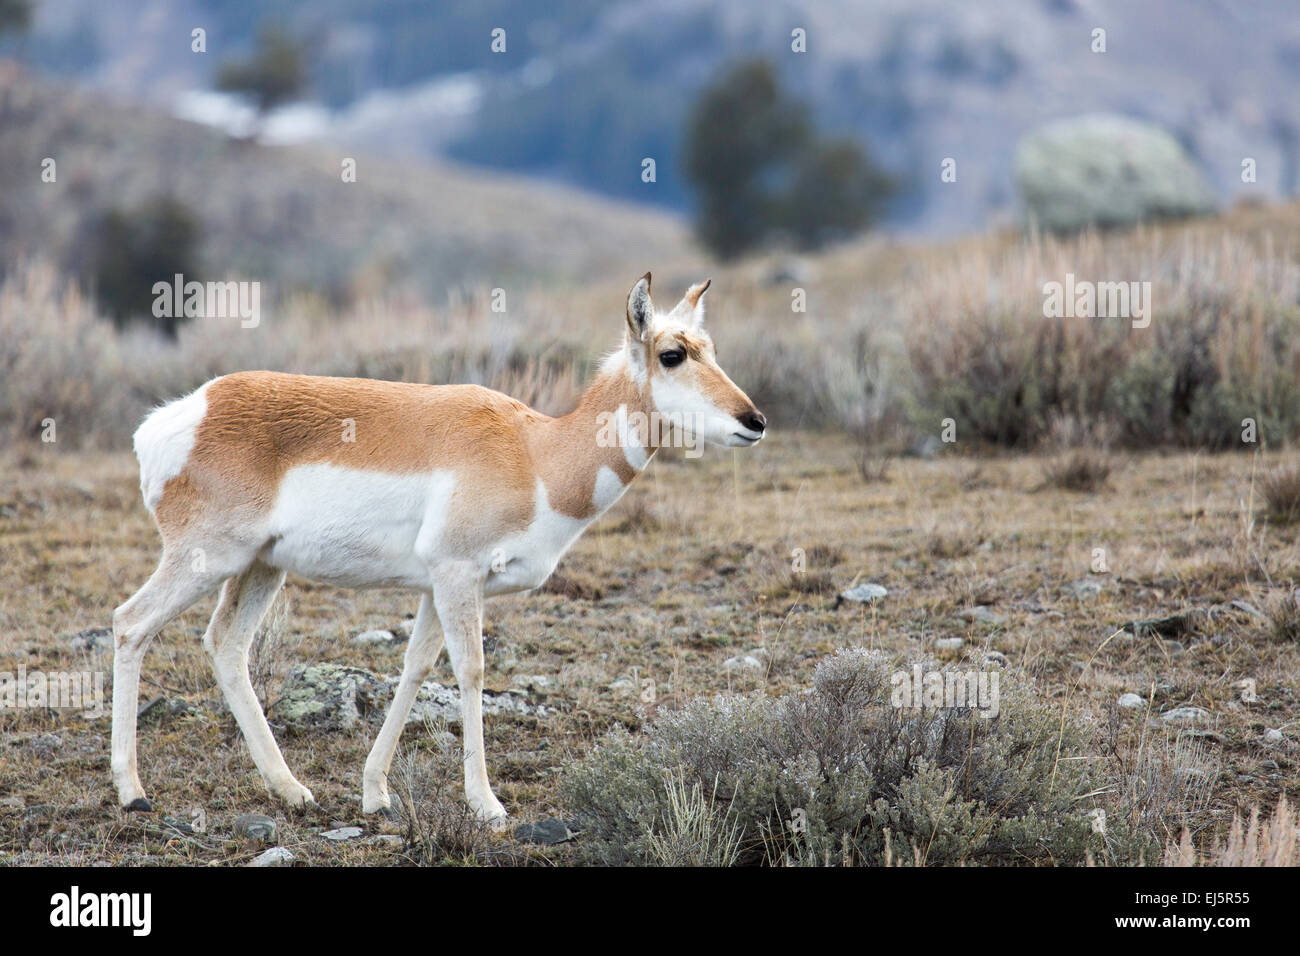 A Pronghorn in the Lamar Valley at Yellowstone National Park March 18, 2015 in Yellowstone, Wyoming. The deer-like Pronghorn is the sole surviving member of an ancient family dating back 20 million years and the only animal in the world with branched horns and to shed its horns, as if they were antlers. The Pronghorn is the fastest animal in the western hemisphere, running in 20-foot bounds at up to 60 miles per hour. Stock Photo